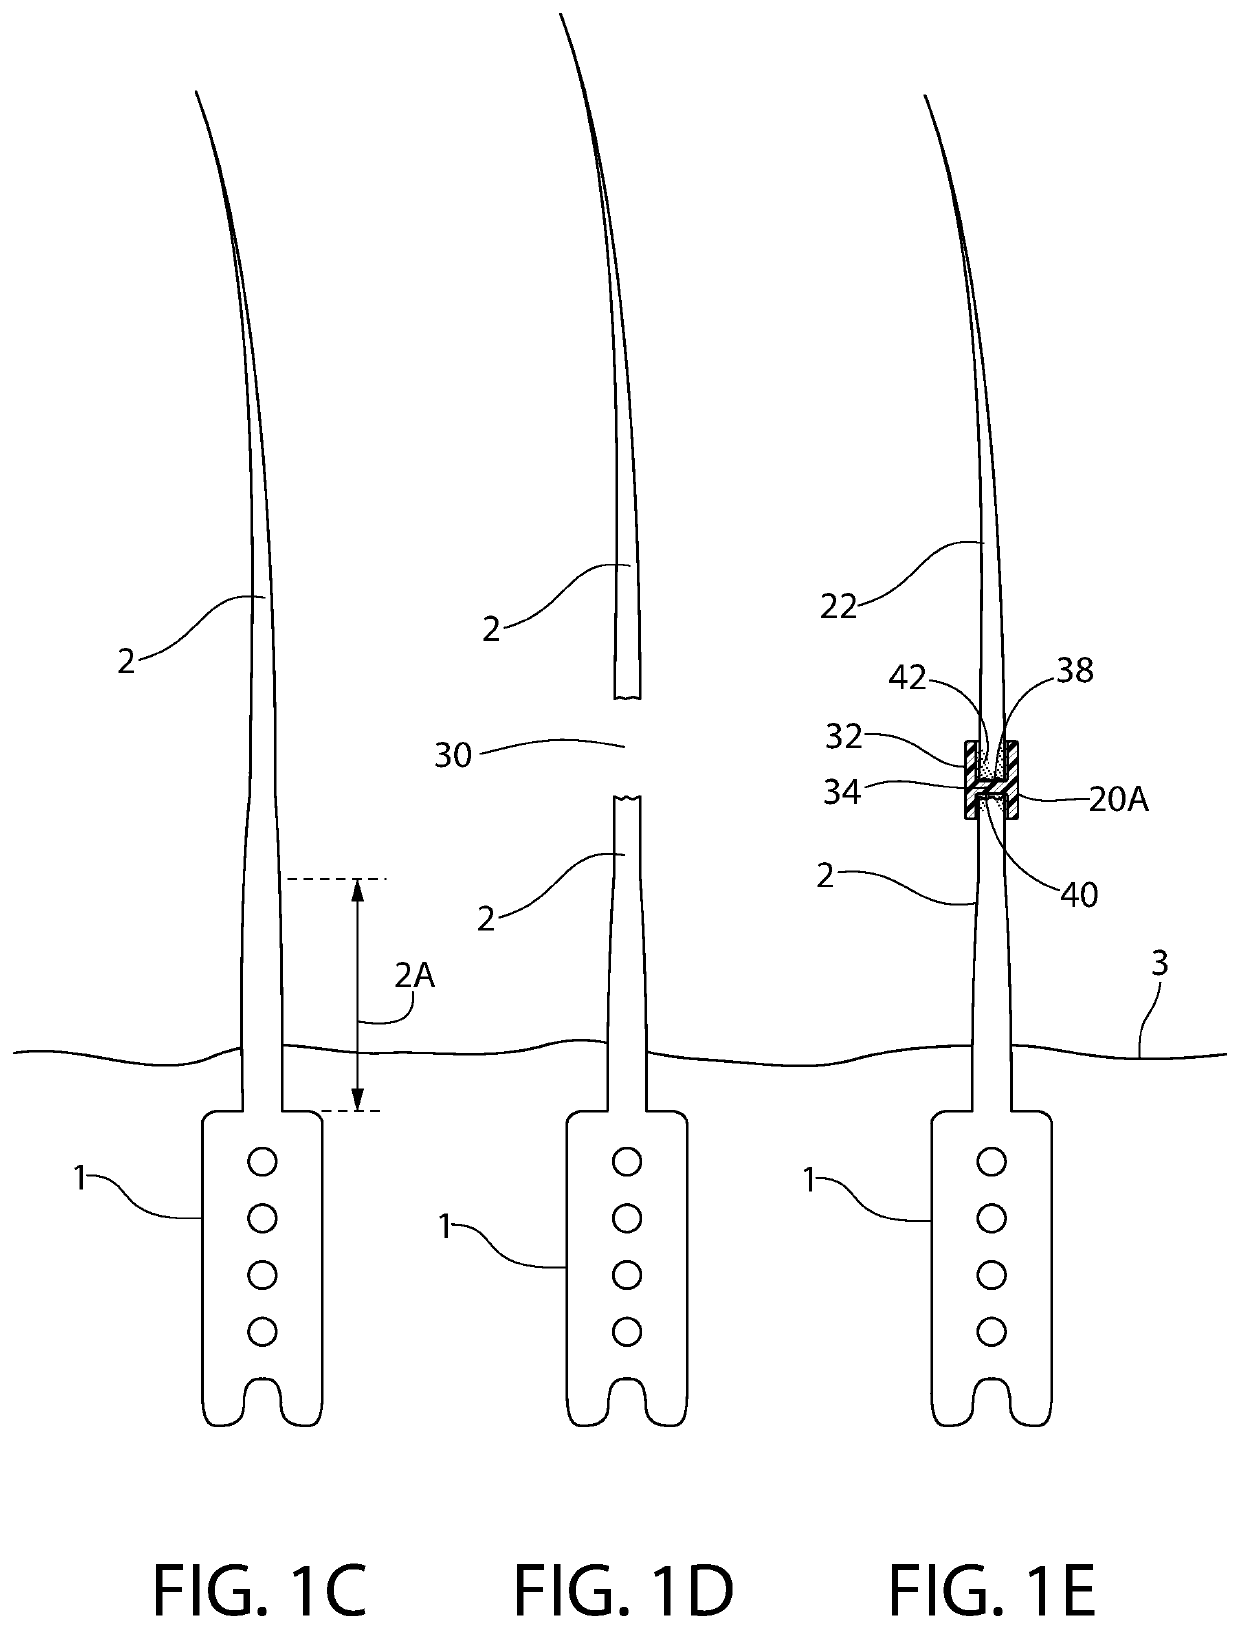 Extension apparatus for artificial hair implants